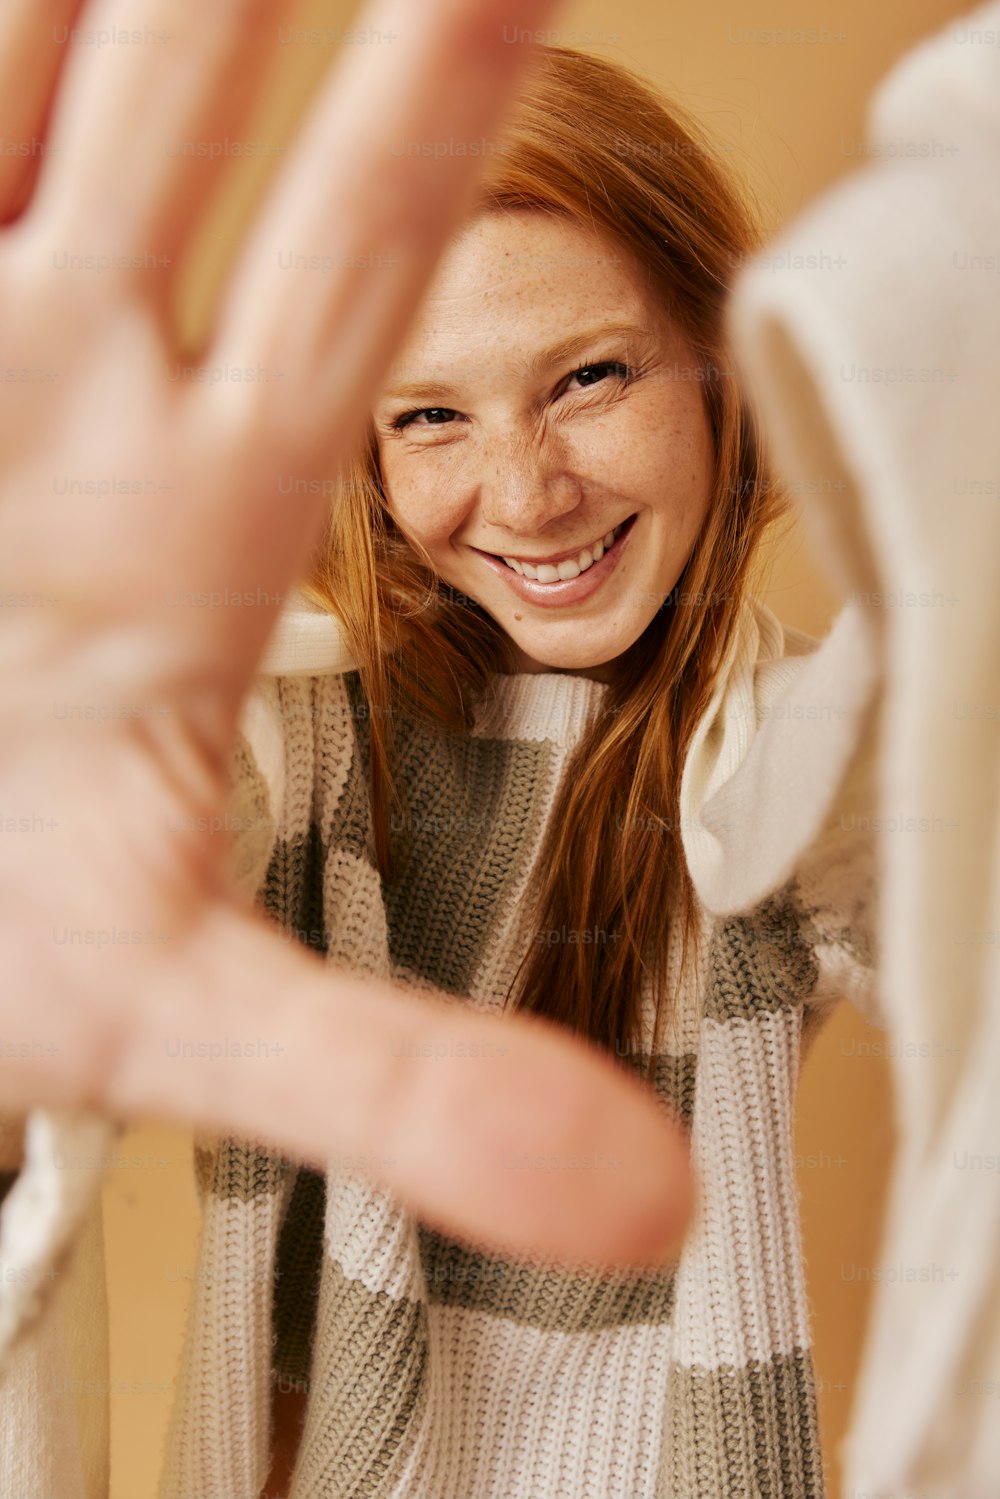 a woman is smiling and making a hand gesture